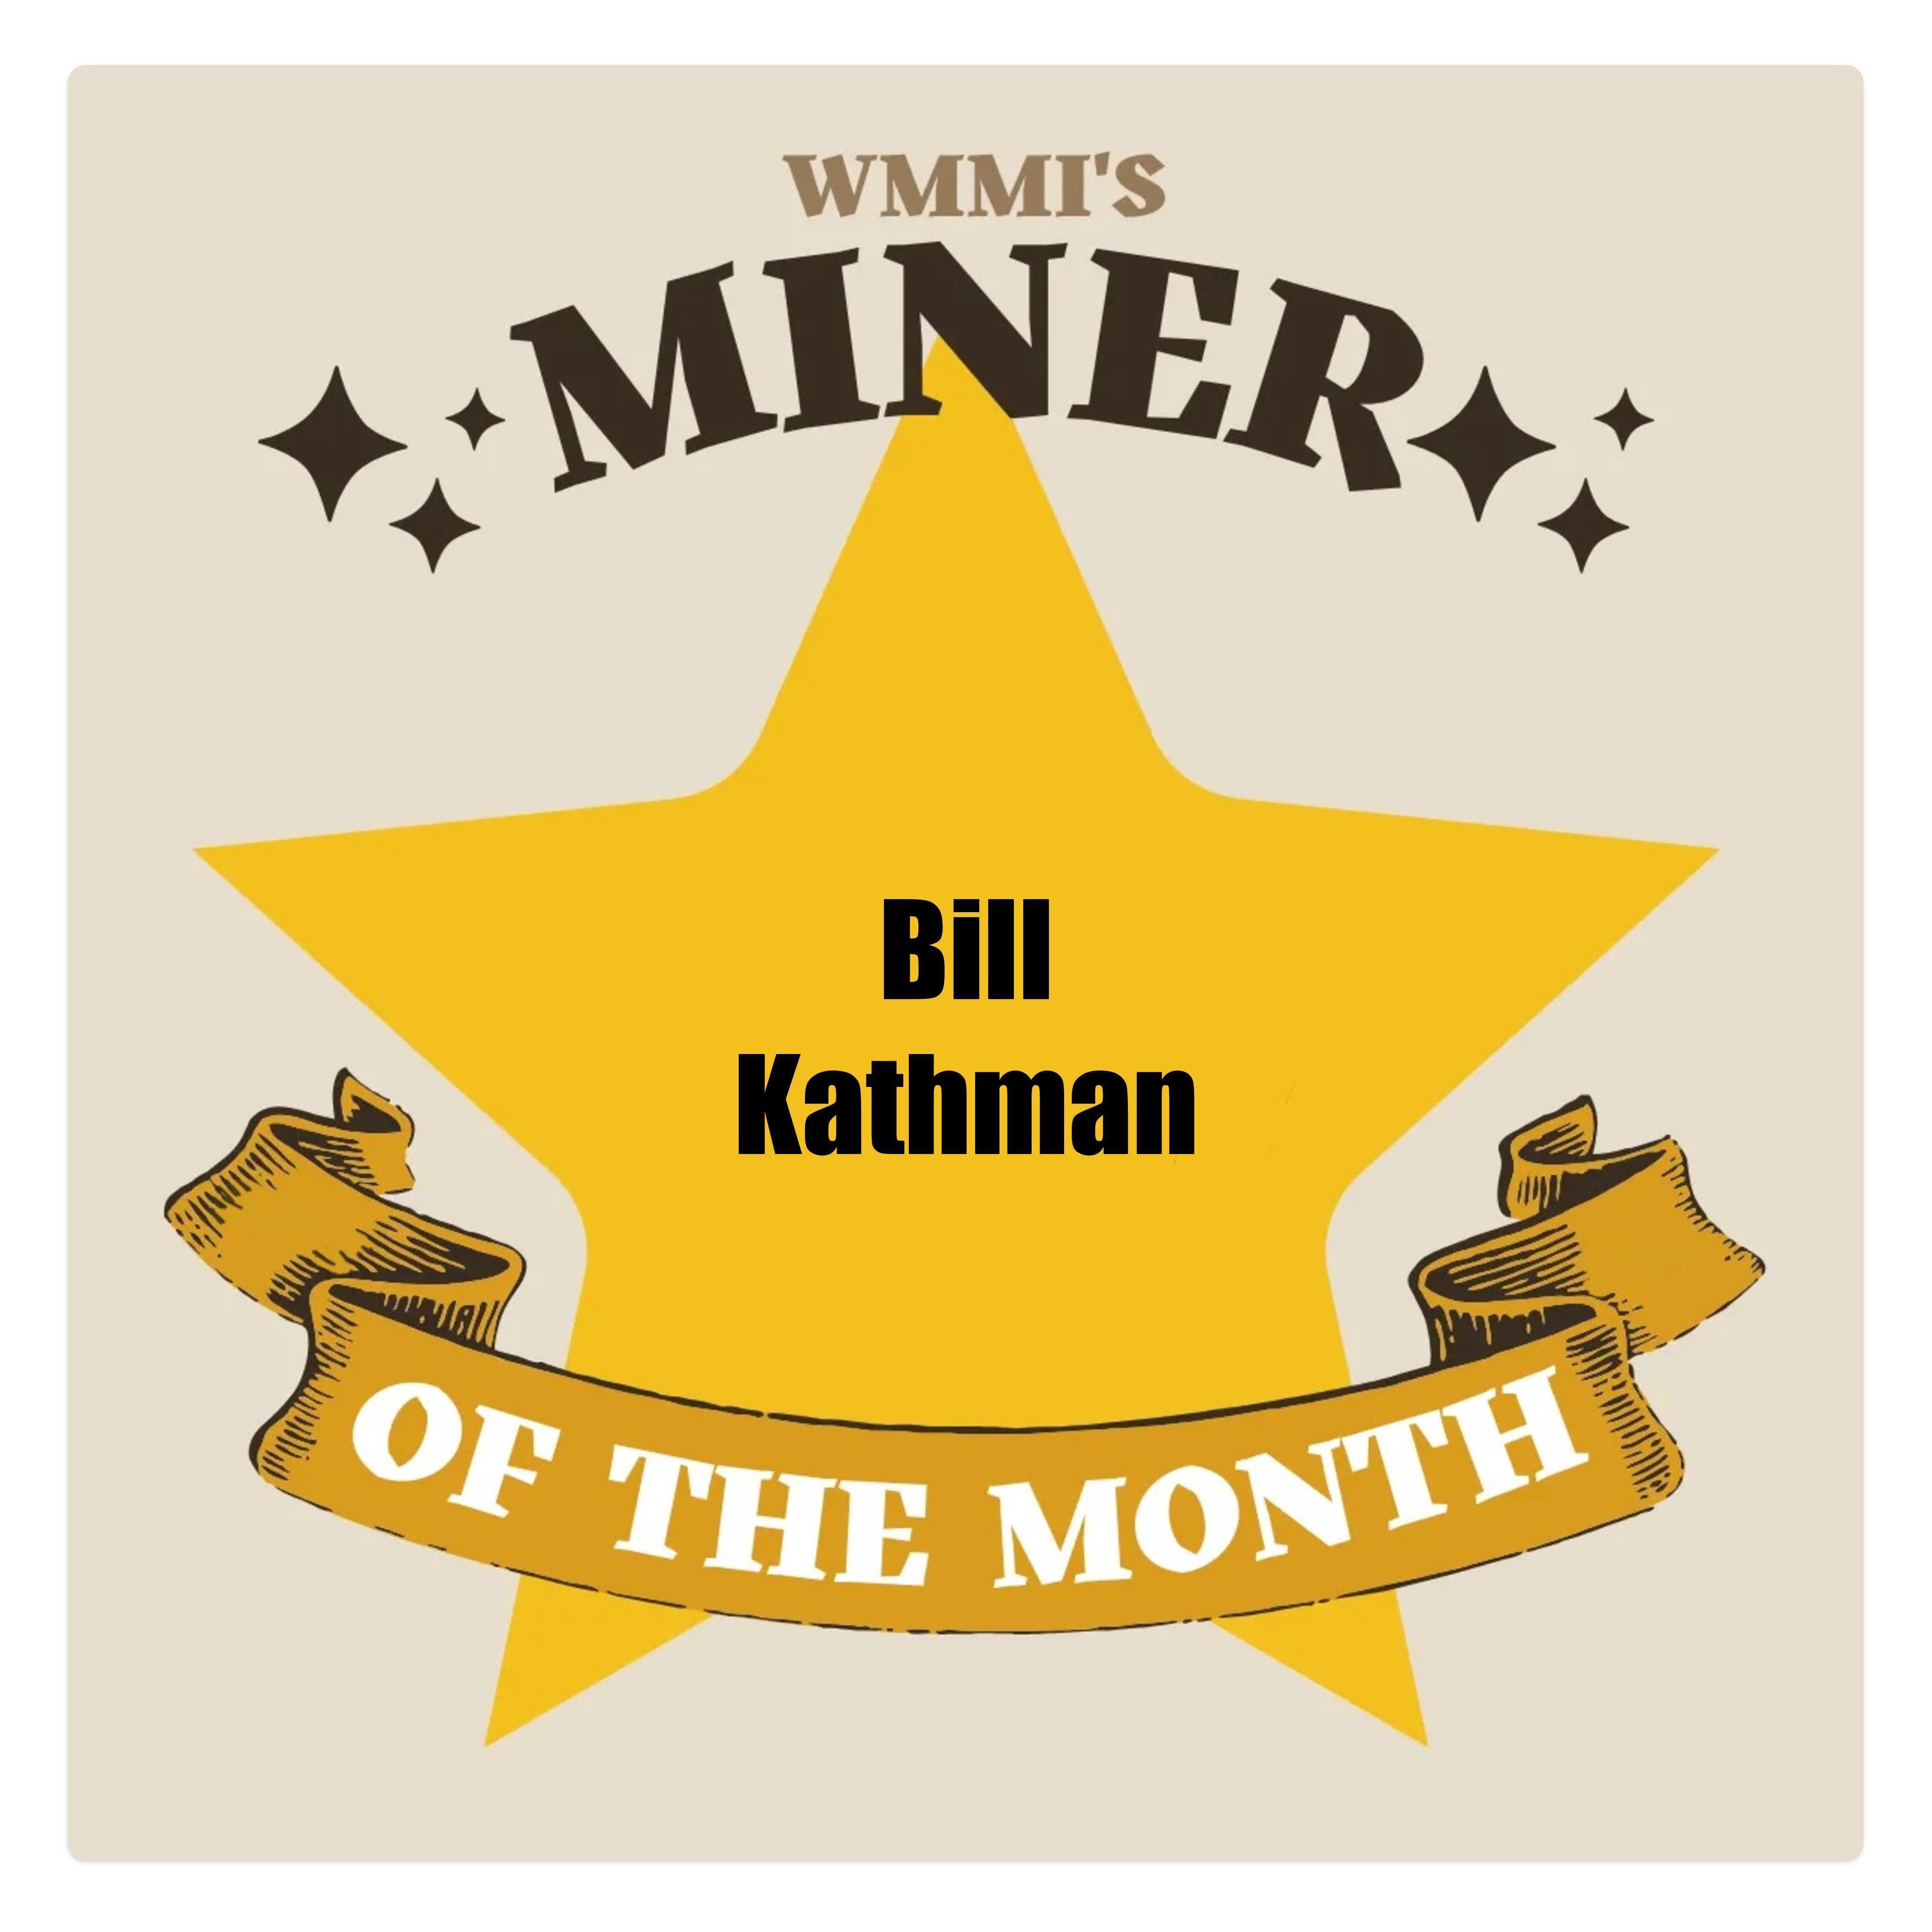 Miner of the Month!